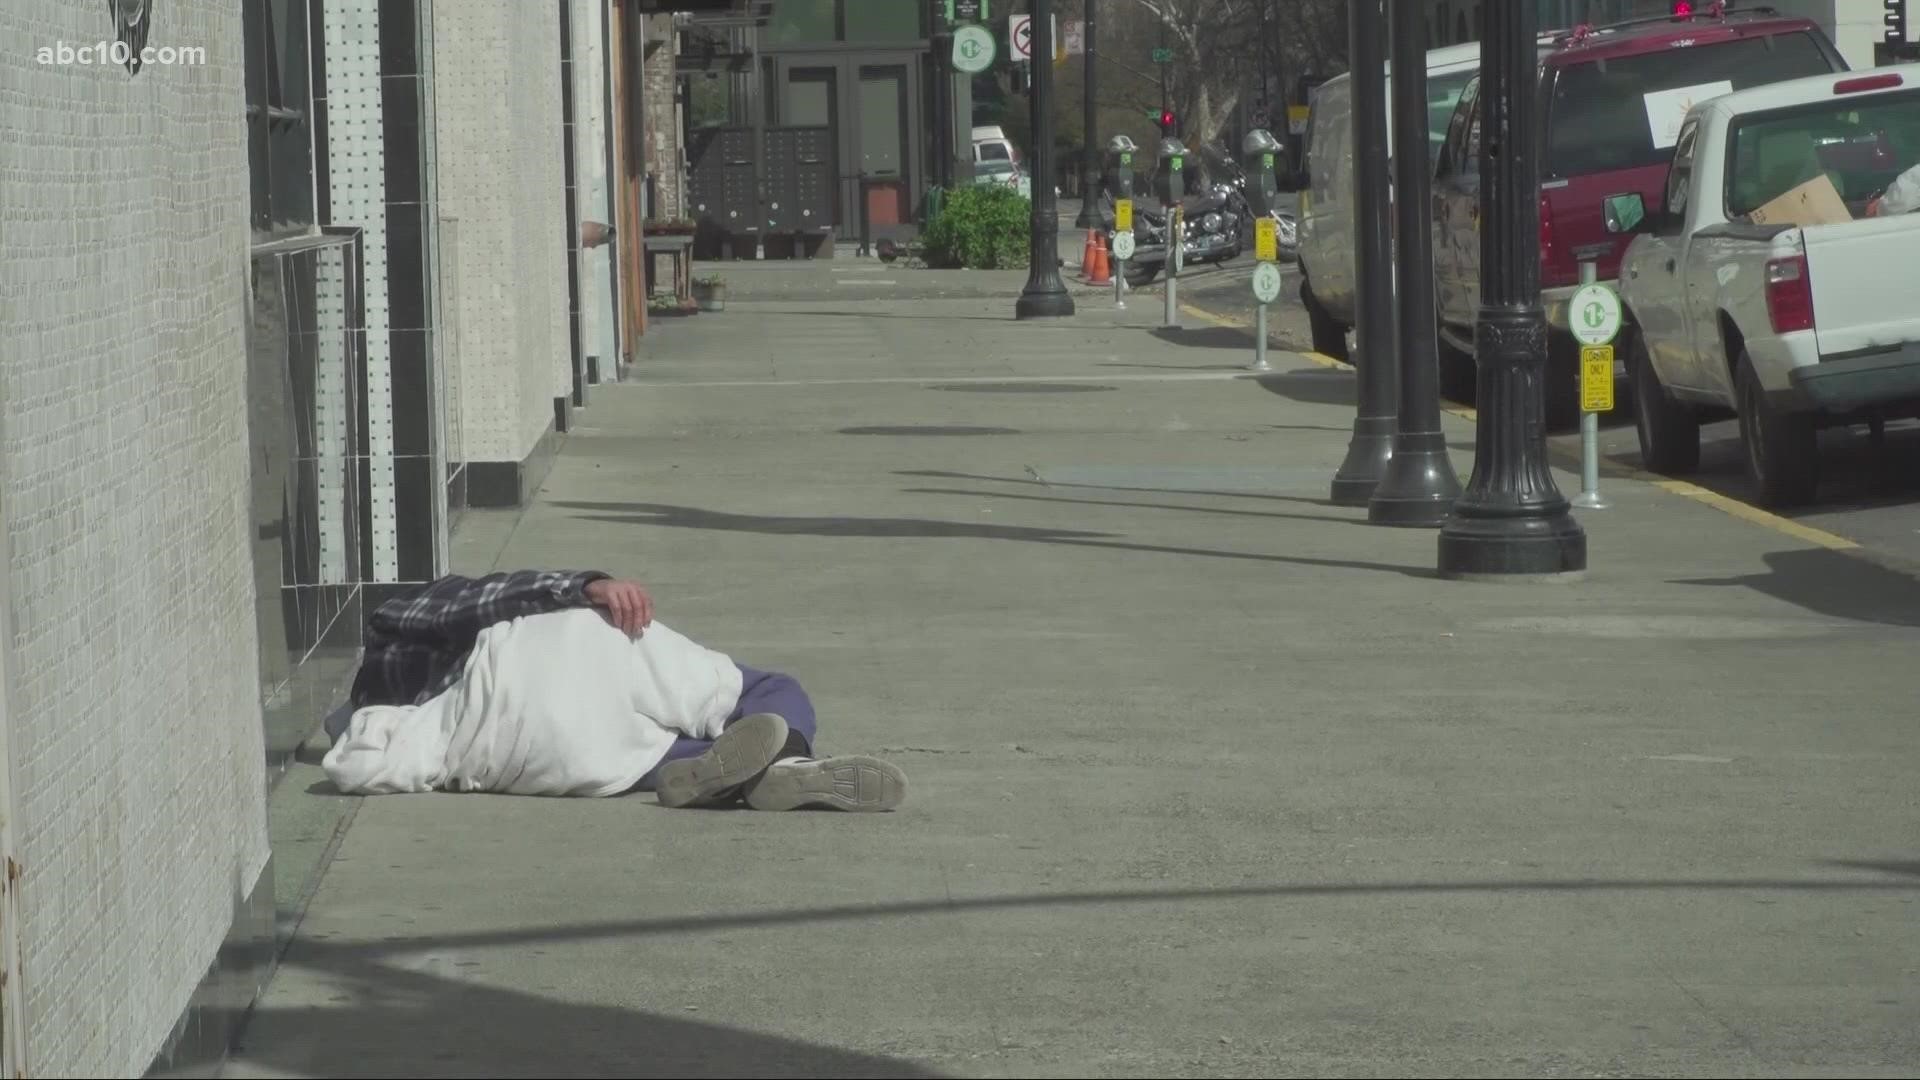 A lawsuit in Sacramento Superior Court could derail the city's plan to place the homeless under the WX freeway.